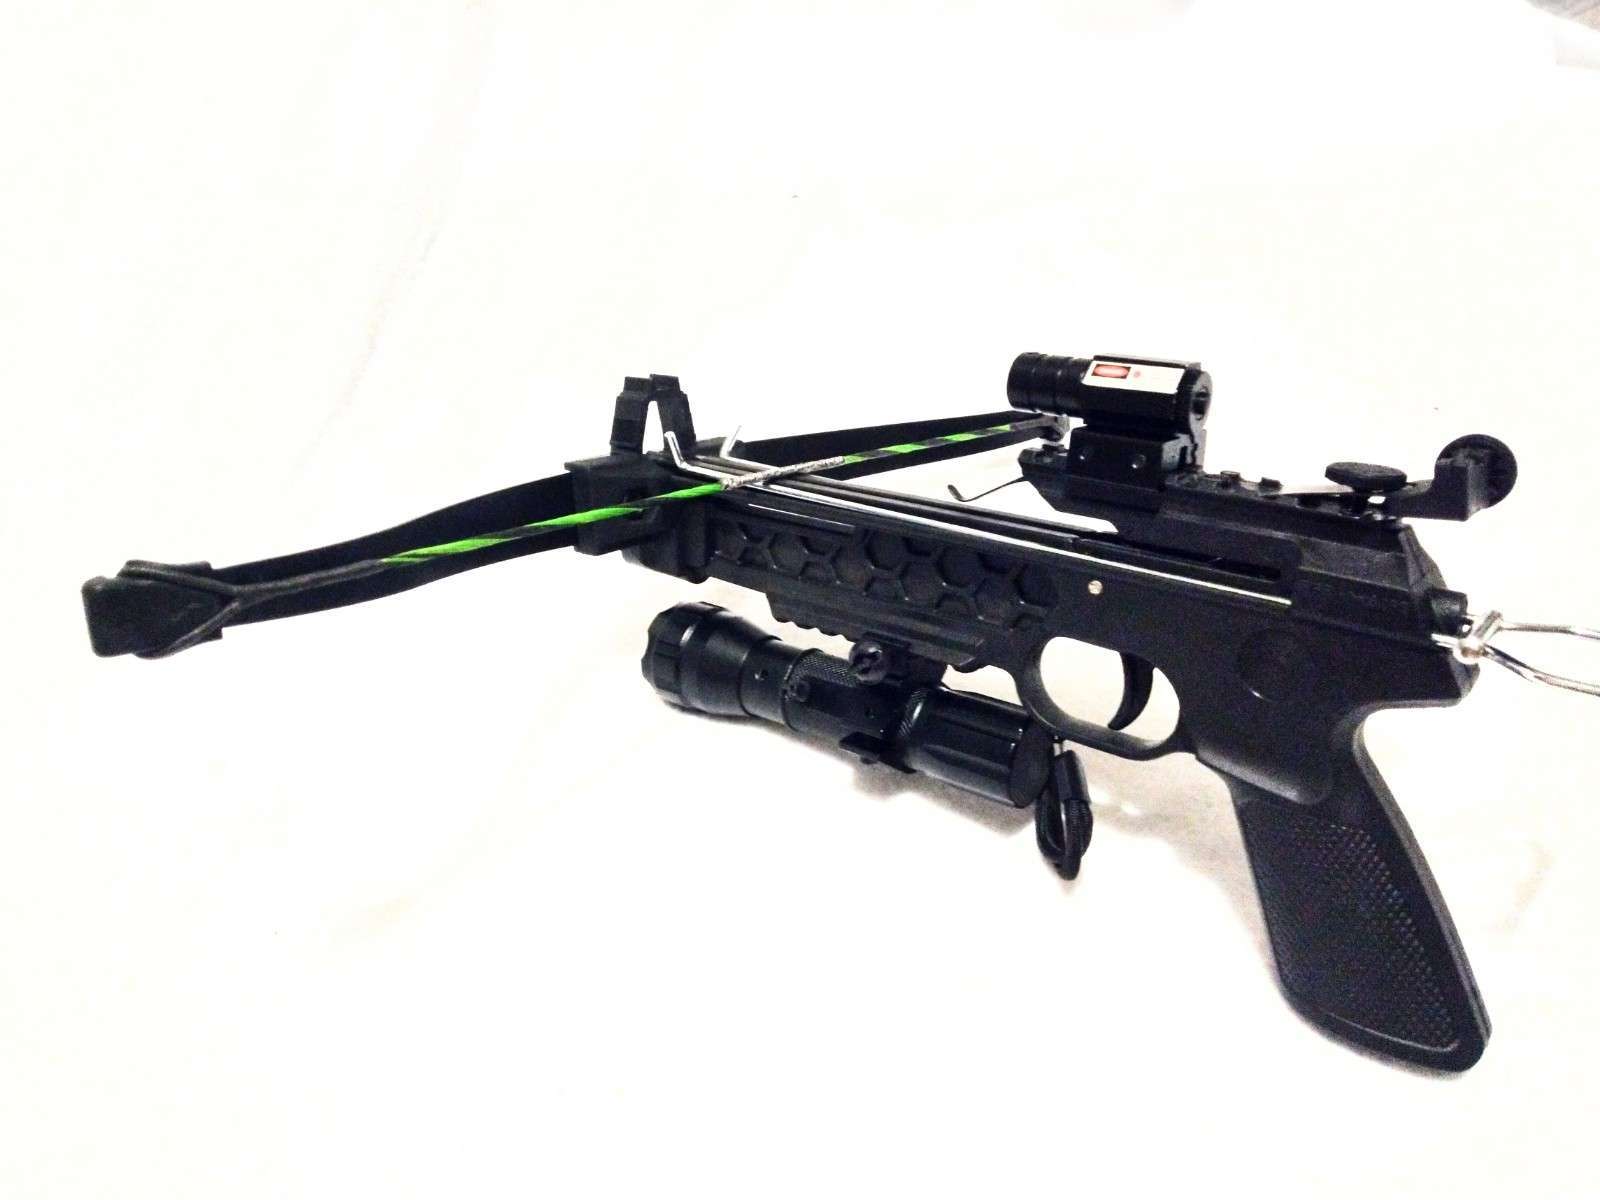 80 lbs Mongoose crossbow with upper and lower picatinny rails (22mm)